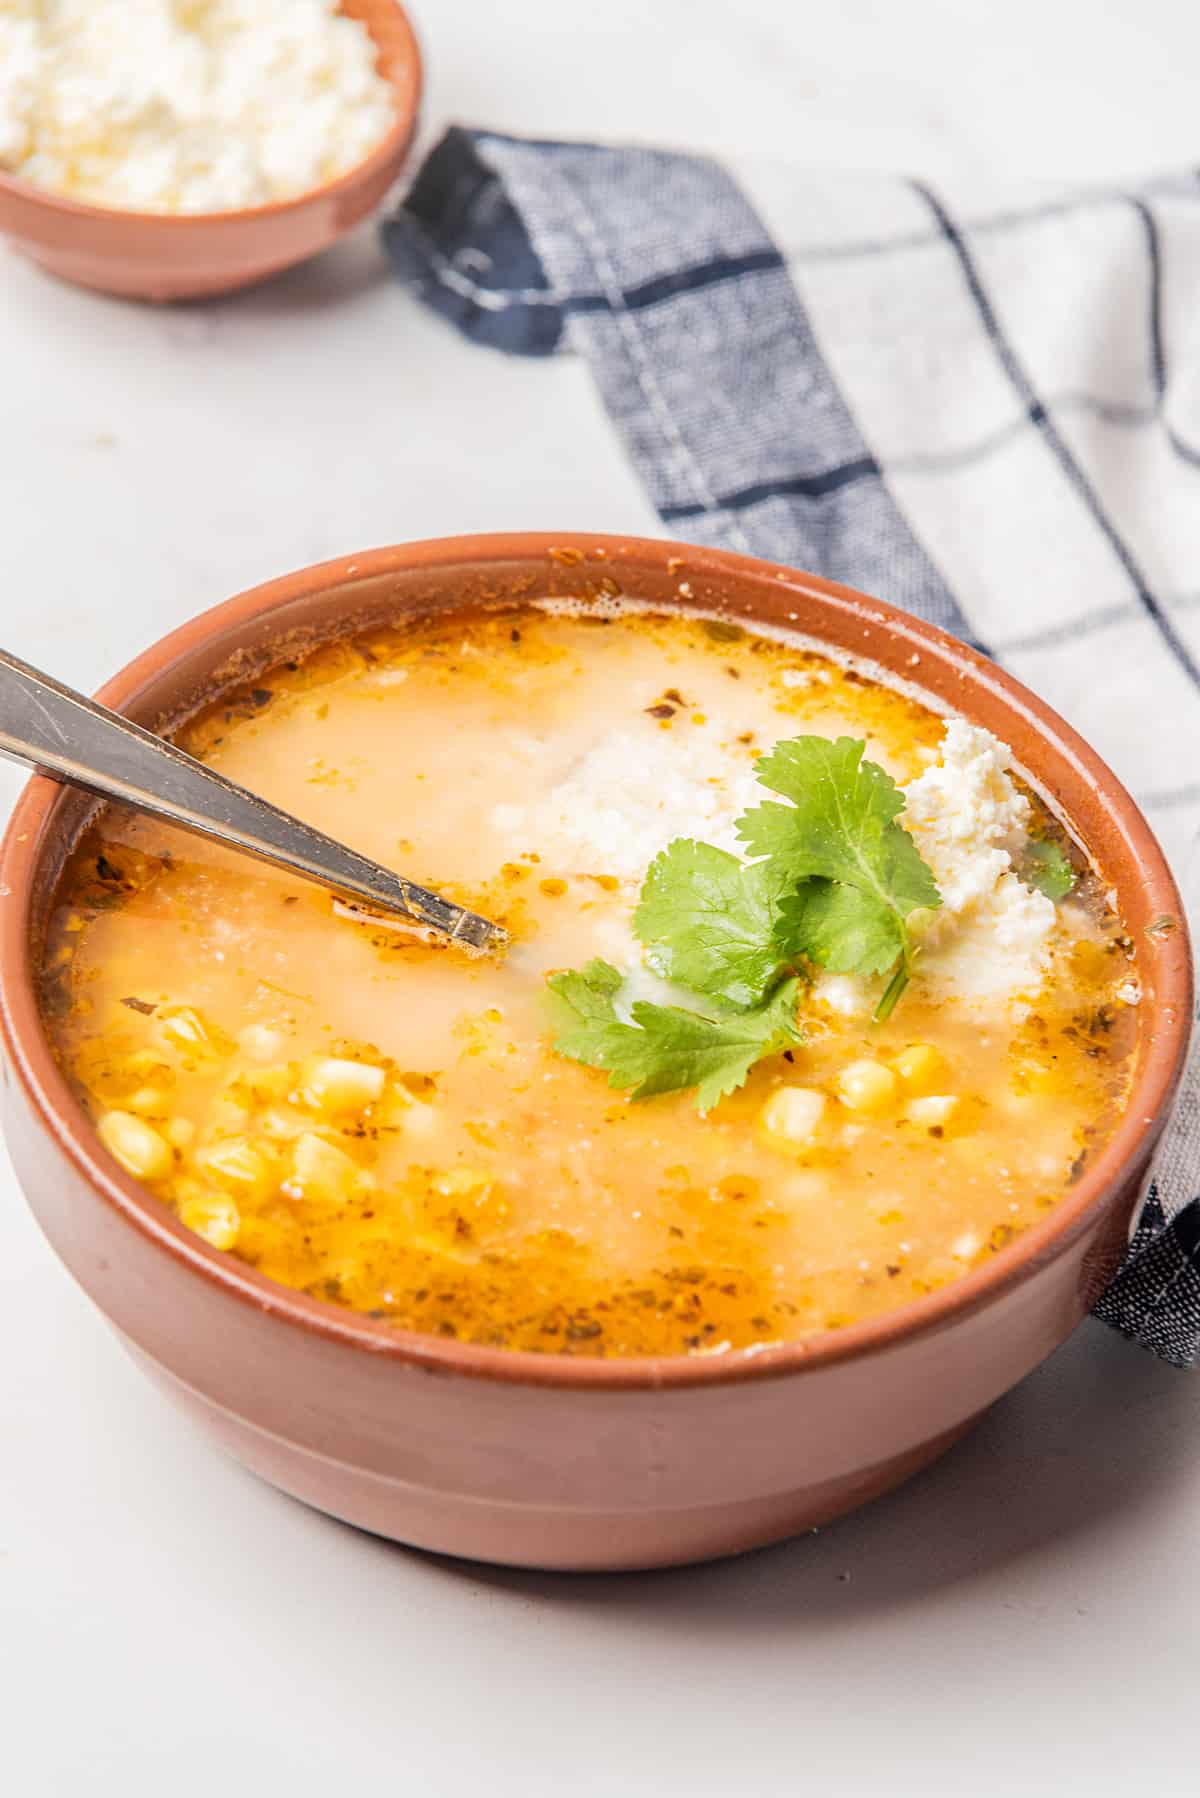 Bowl of Sopa de Elote topped with cheese and Mexican crema.